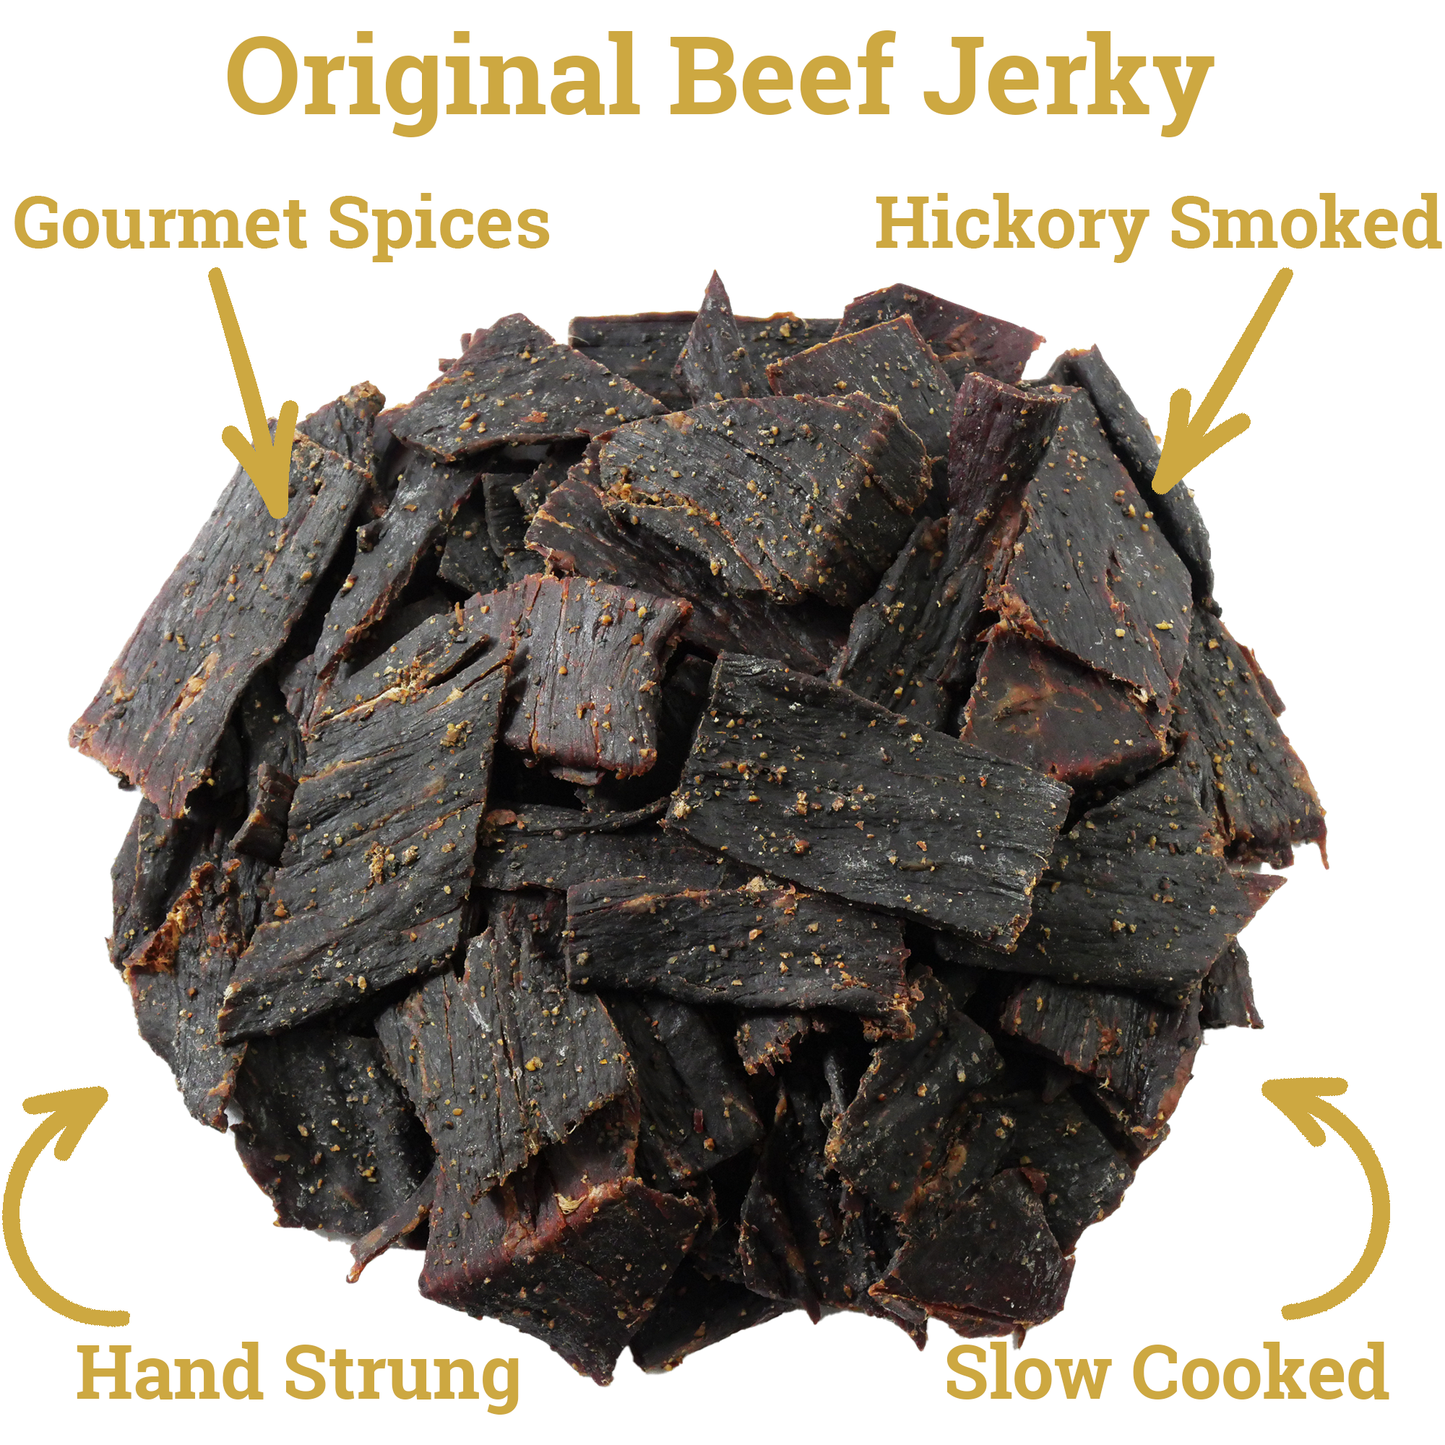 Lone Star Original Beef Jerky - 1 Pound Resealable Bag - Classic Handcrafted Flavor - Made in the USA